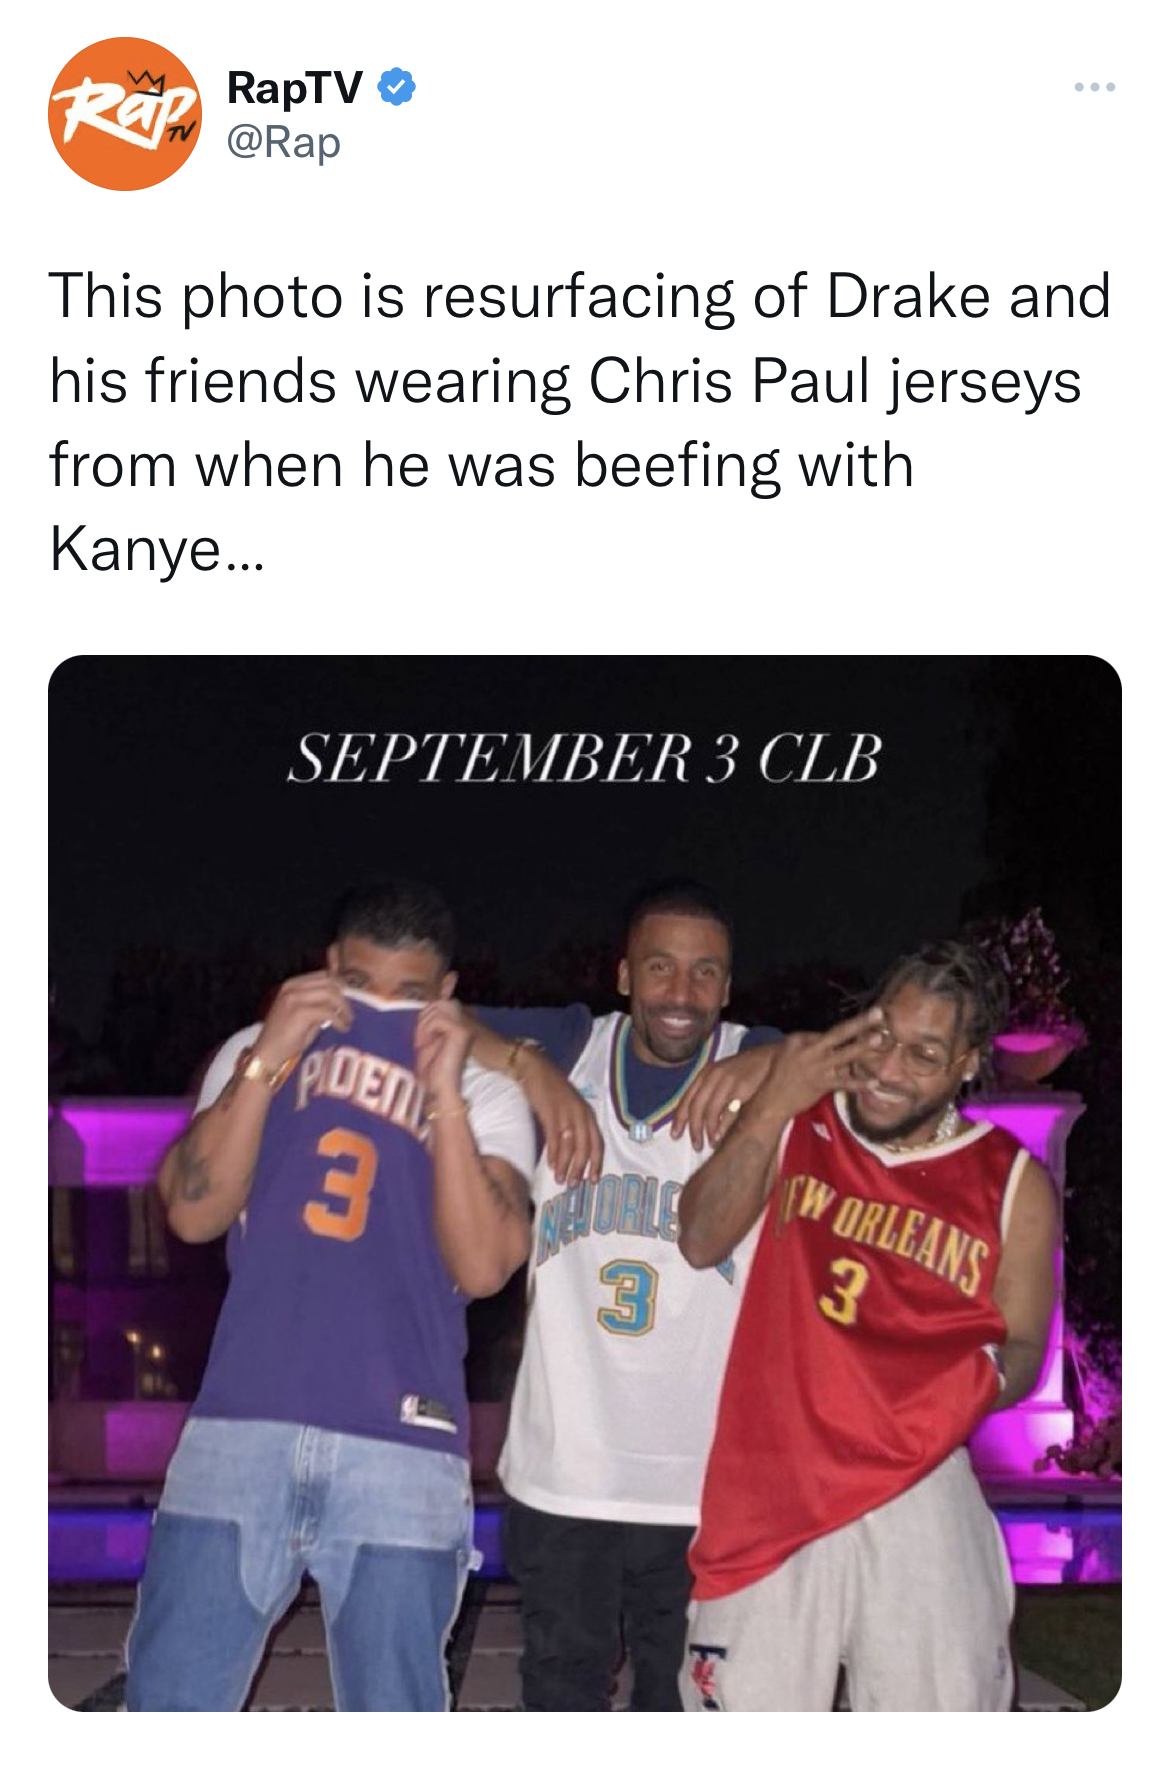 Chris Paul and Kim K memes - drake and chris paul - Rap RapTV This photo is resurfacing of Drake and his friends wearing Chris Paul jerseys from when he was beefing with Kanye... September 3 Clb Pidente 3 W Orleans 3